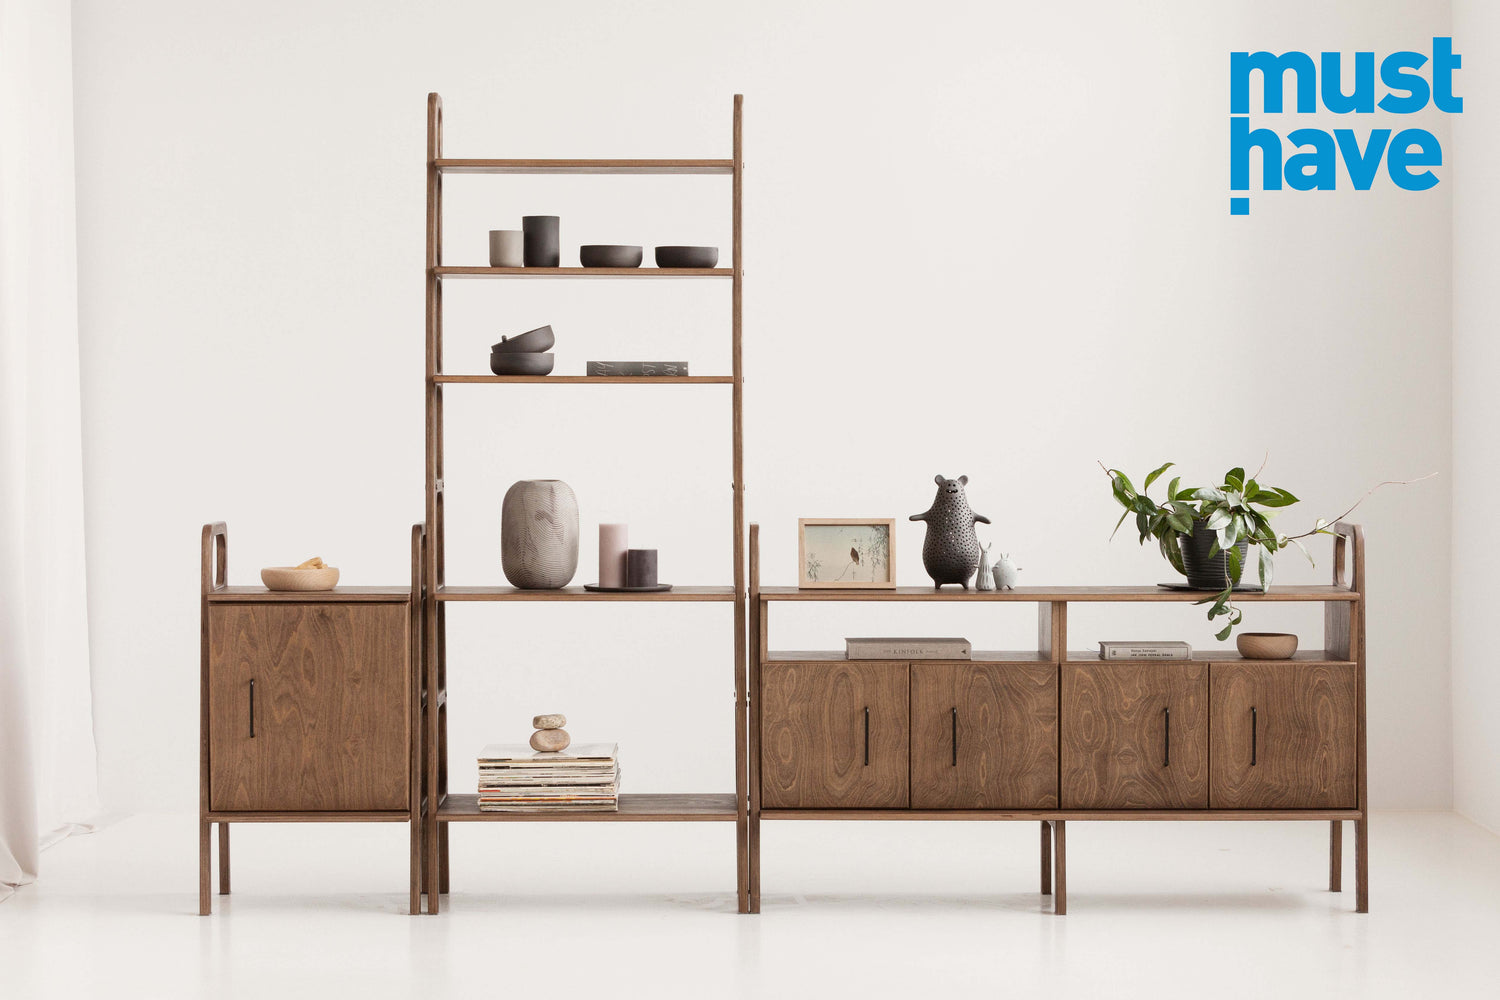 Award-Winning MUST HAVE Lodz Design Festival Bookcase Collection | Plywood Project